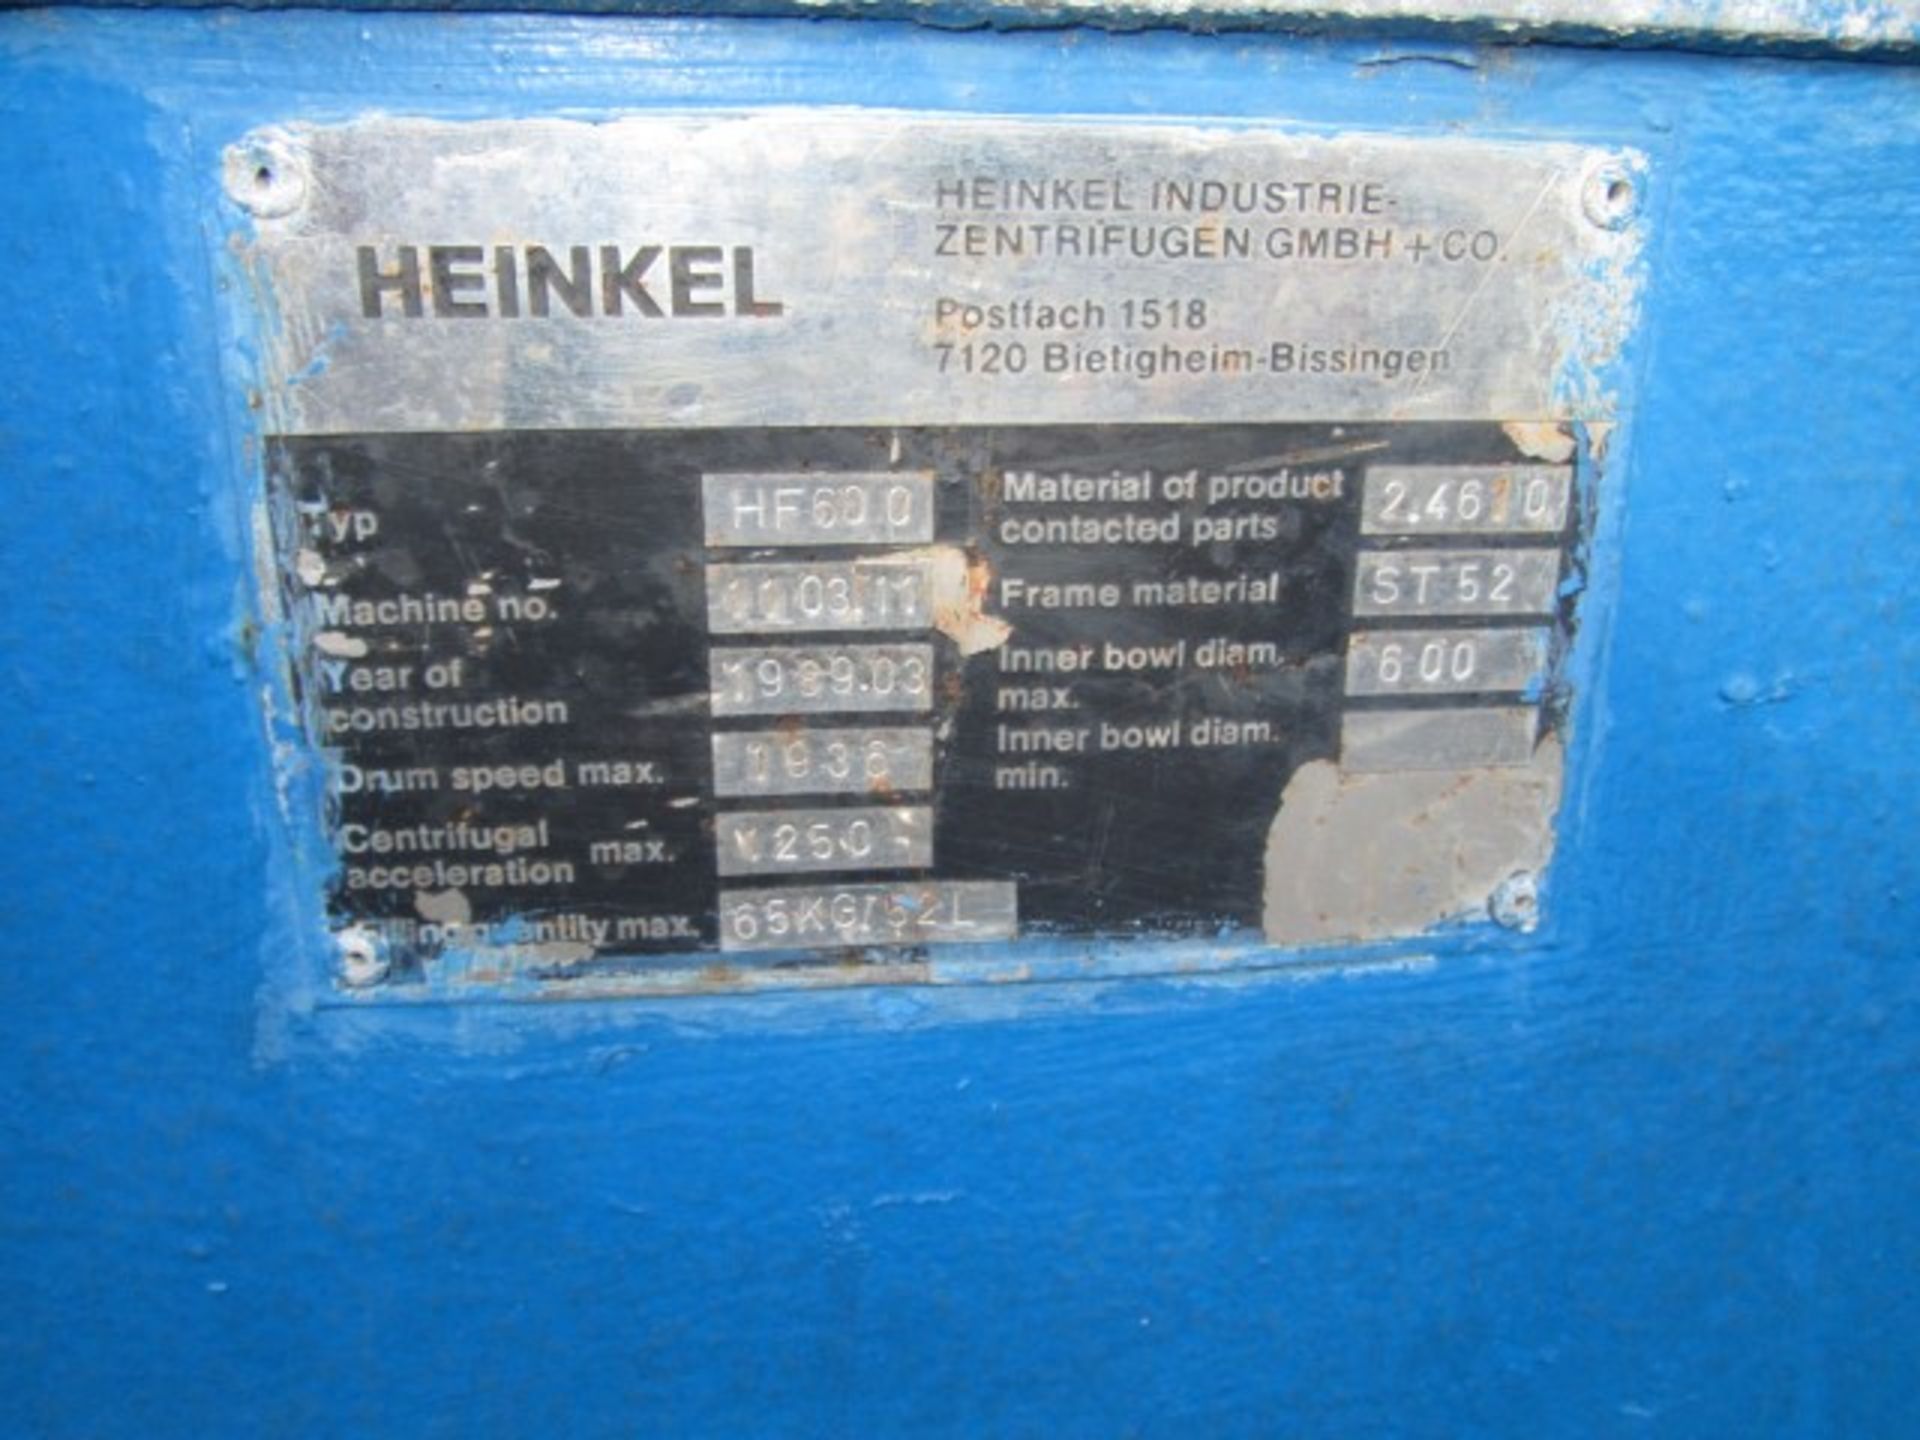 Heinkel HF-600 Inverting Filter Centrifuge. Hastelloy C-4 construction on product contact areas. - Image 4 of 11